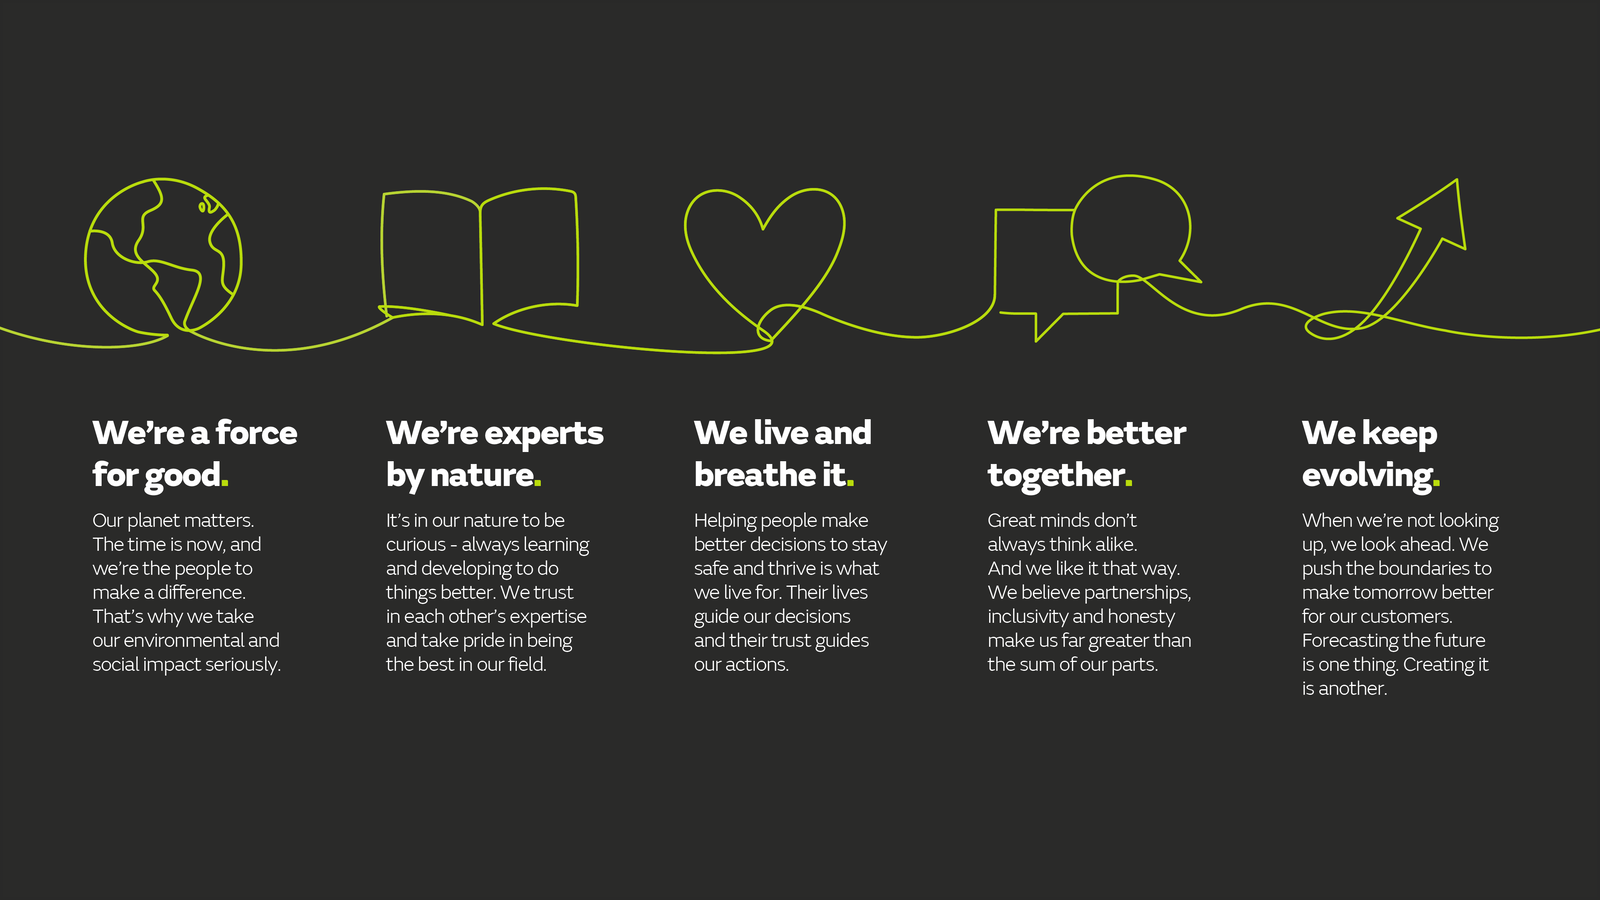 A graphic listing the 5 Met Office values: We're a force for good, We're experts by nature, We live and breathe it, We're better together and We keep evolving